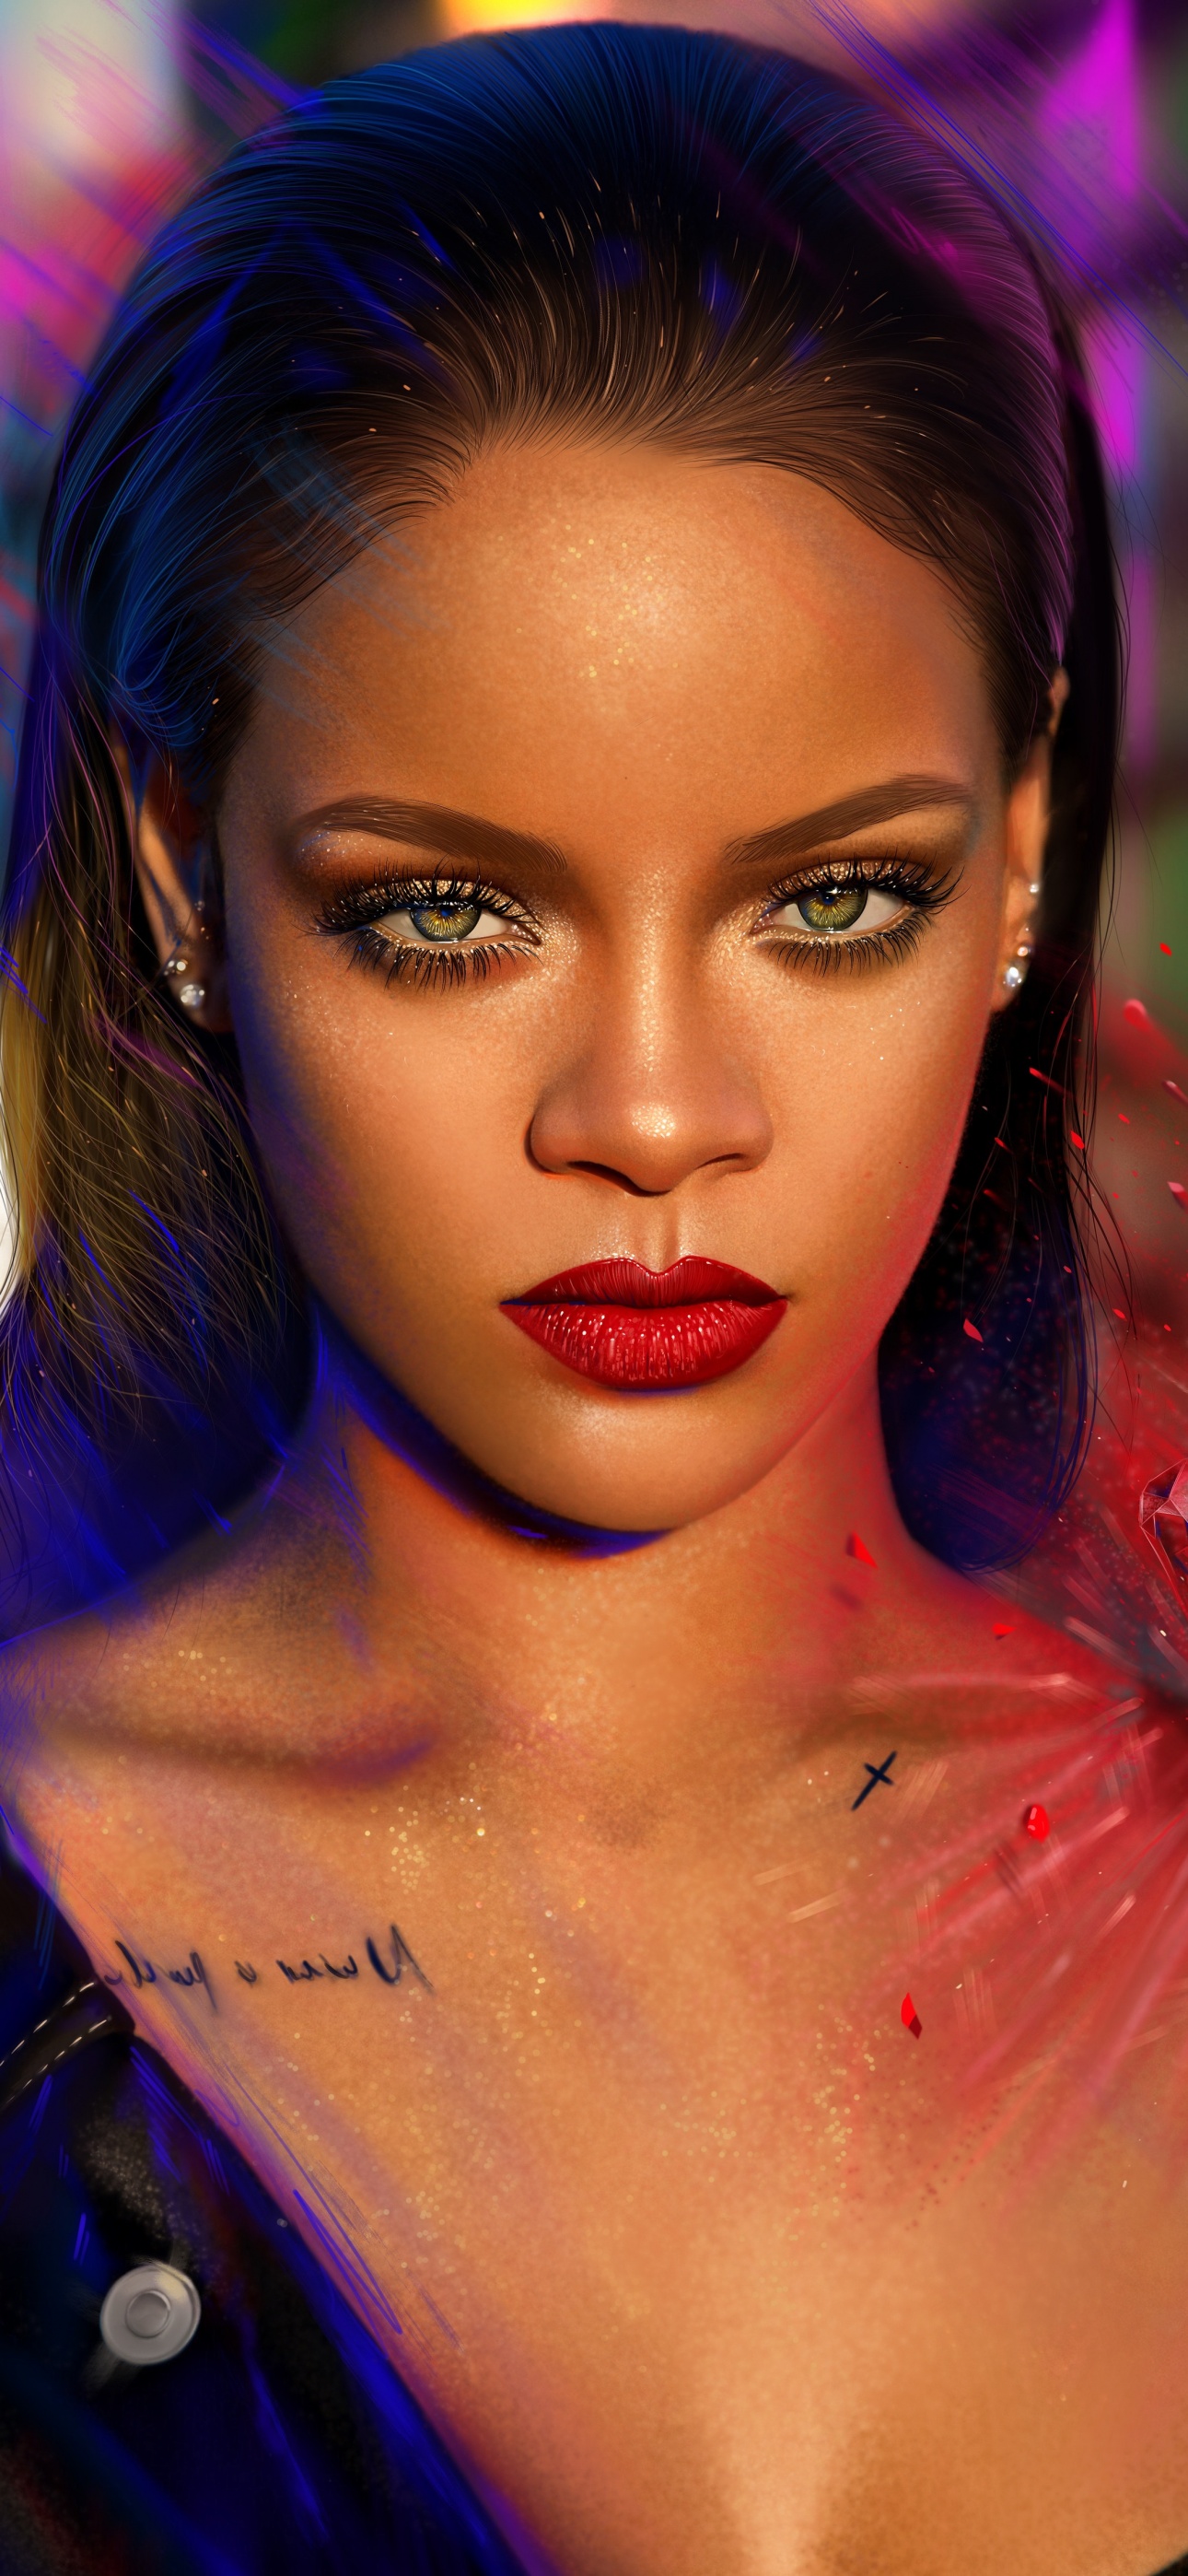 Rihanna 14 640x1136 iPhone 55S5CSE wallpaper background picture image